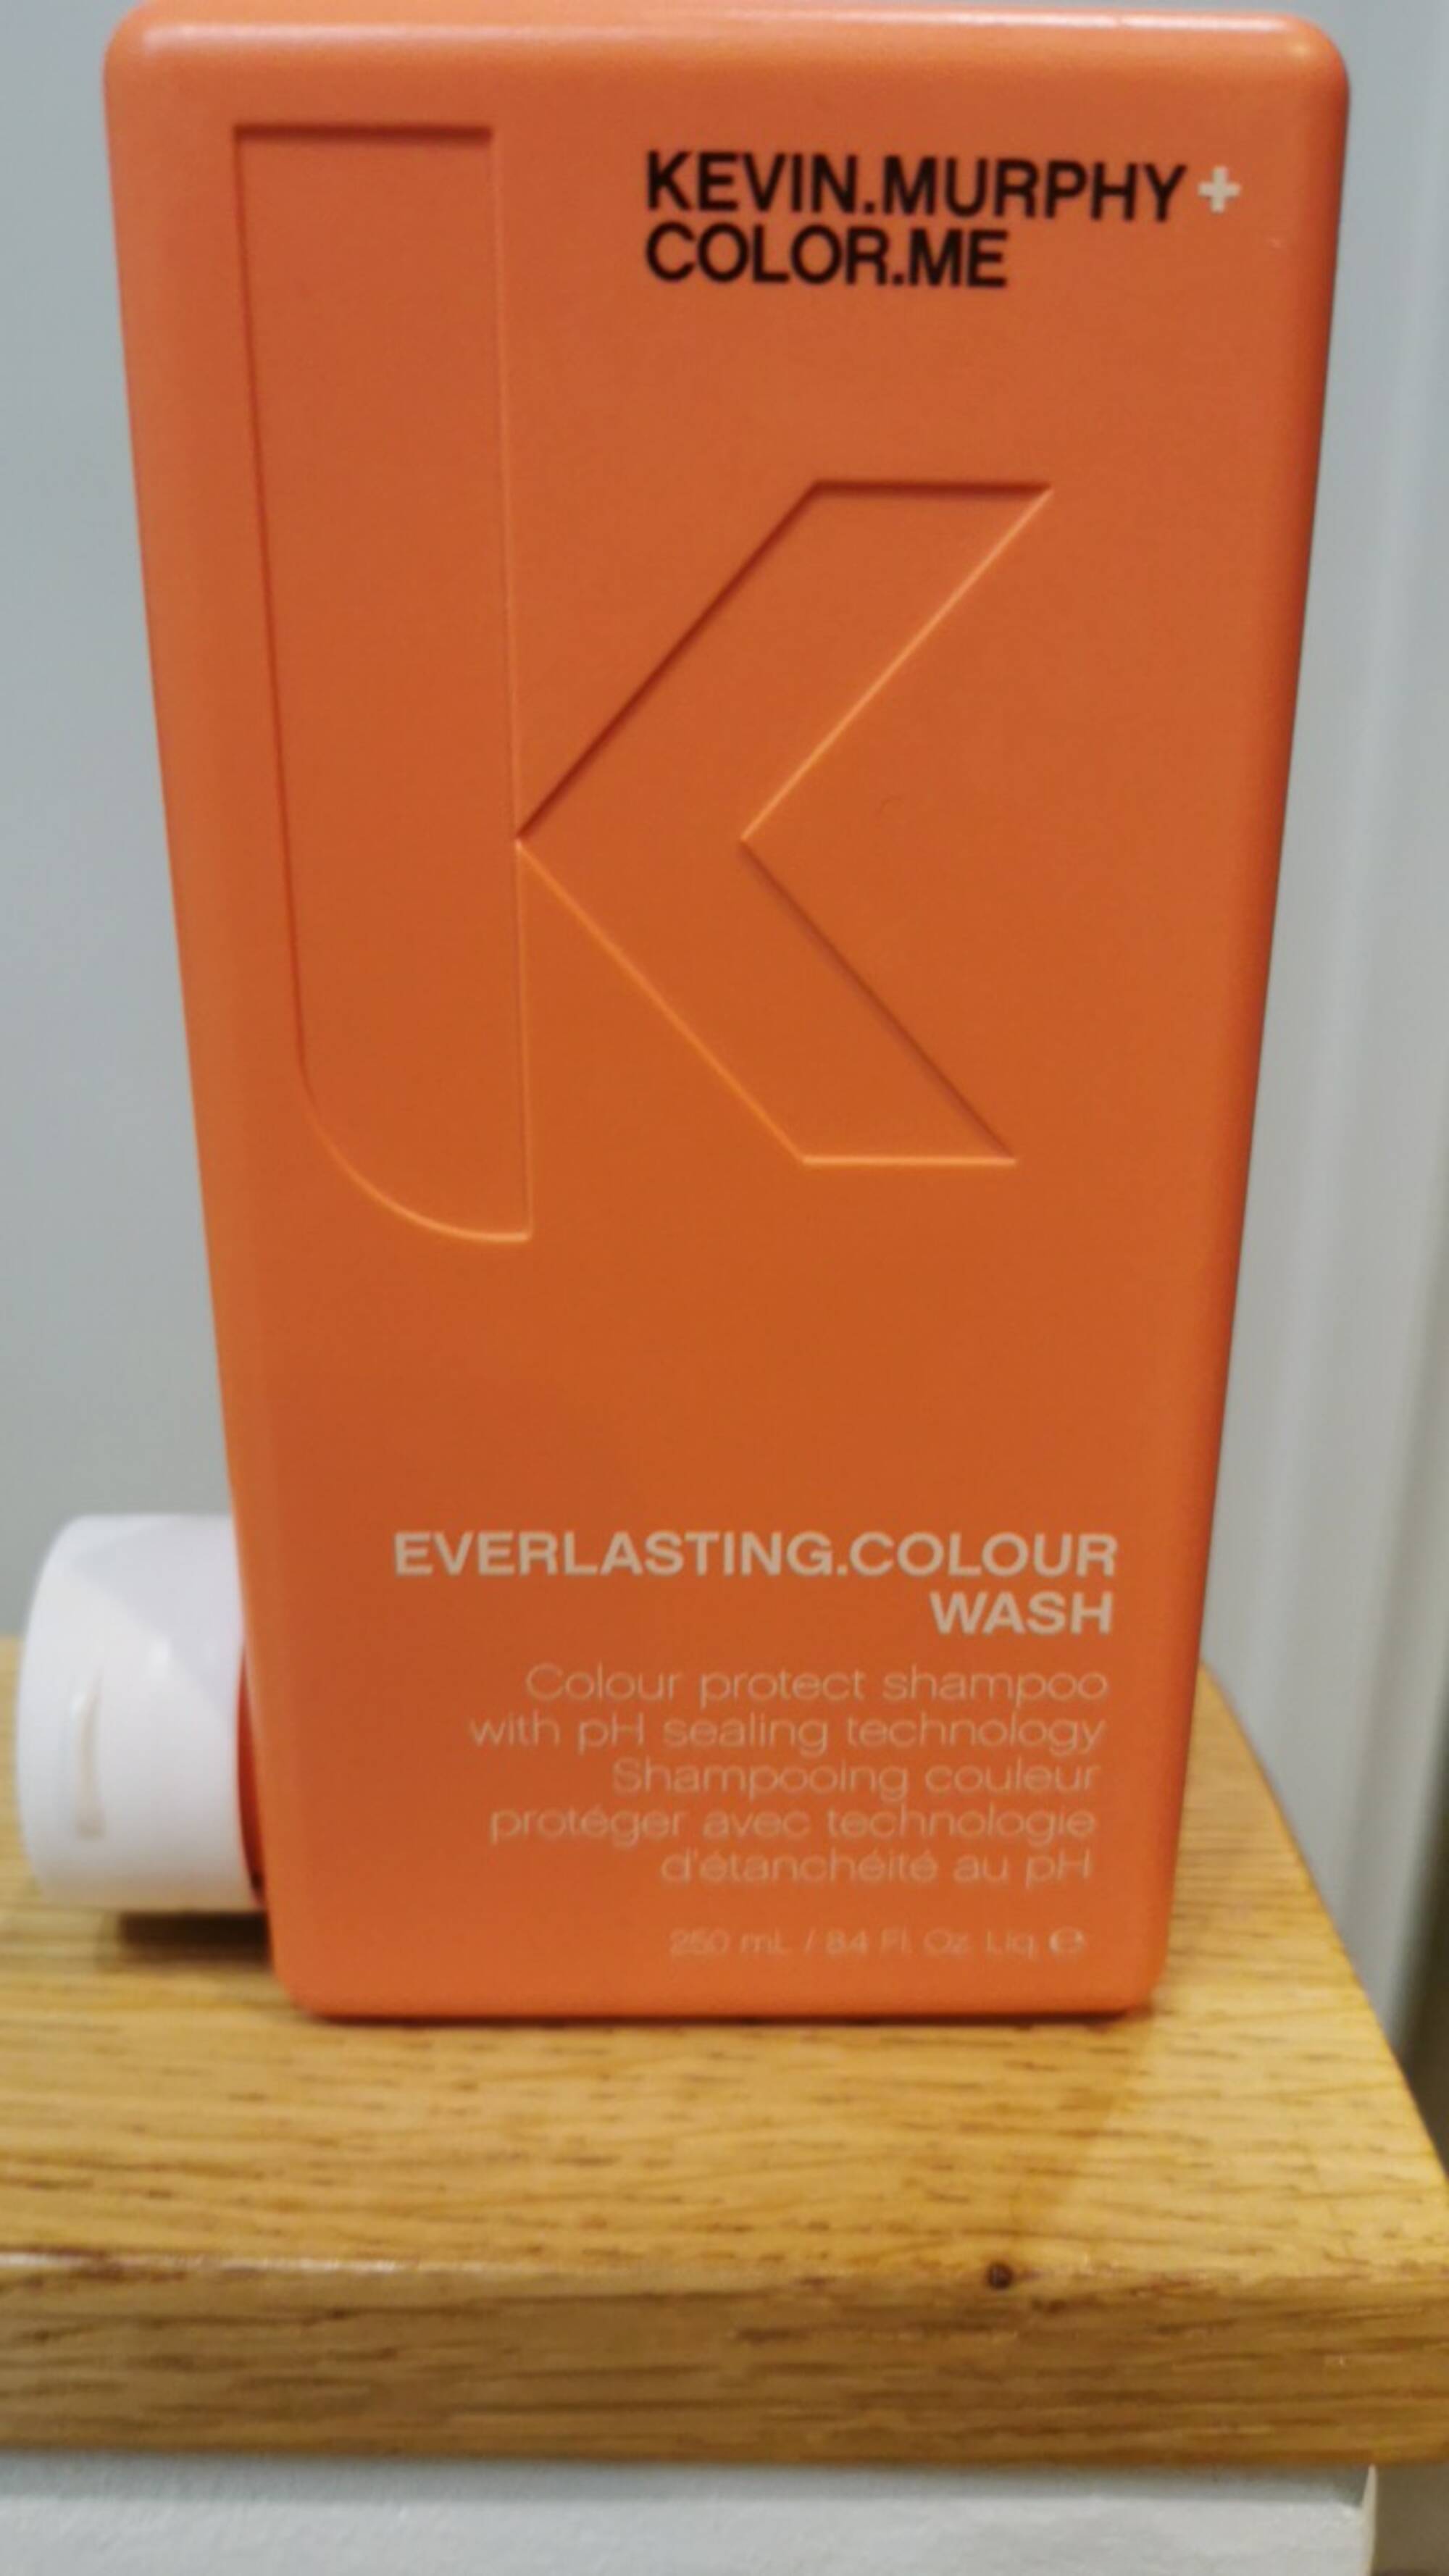 KEVIN MURPHY - Everlasting colour wash - Shampooing couleur